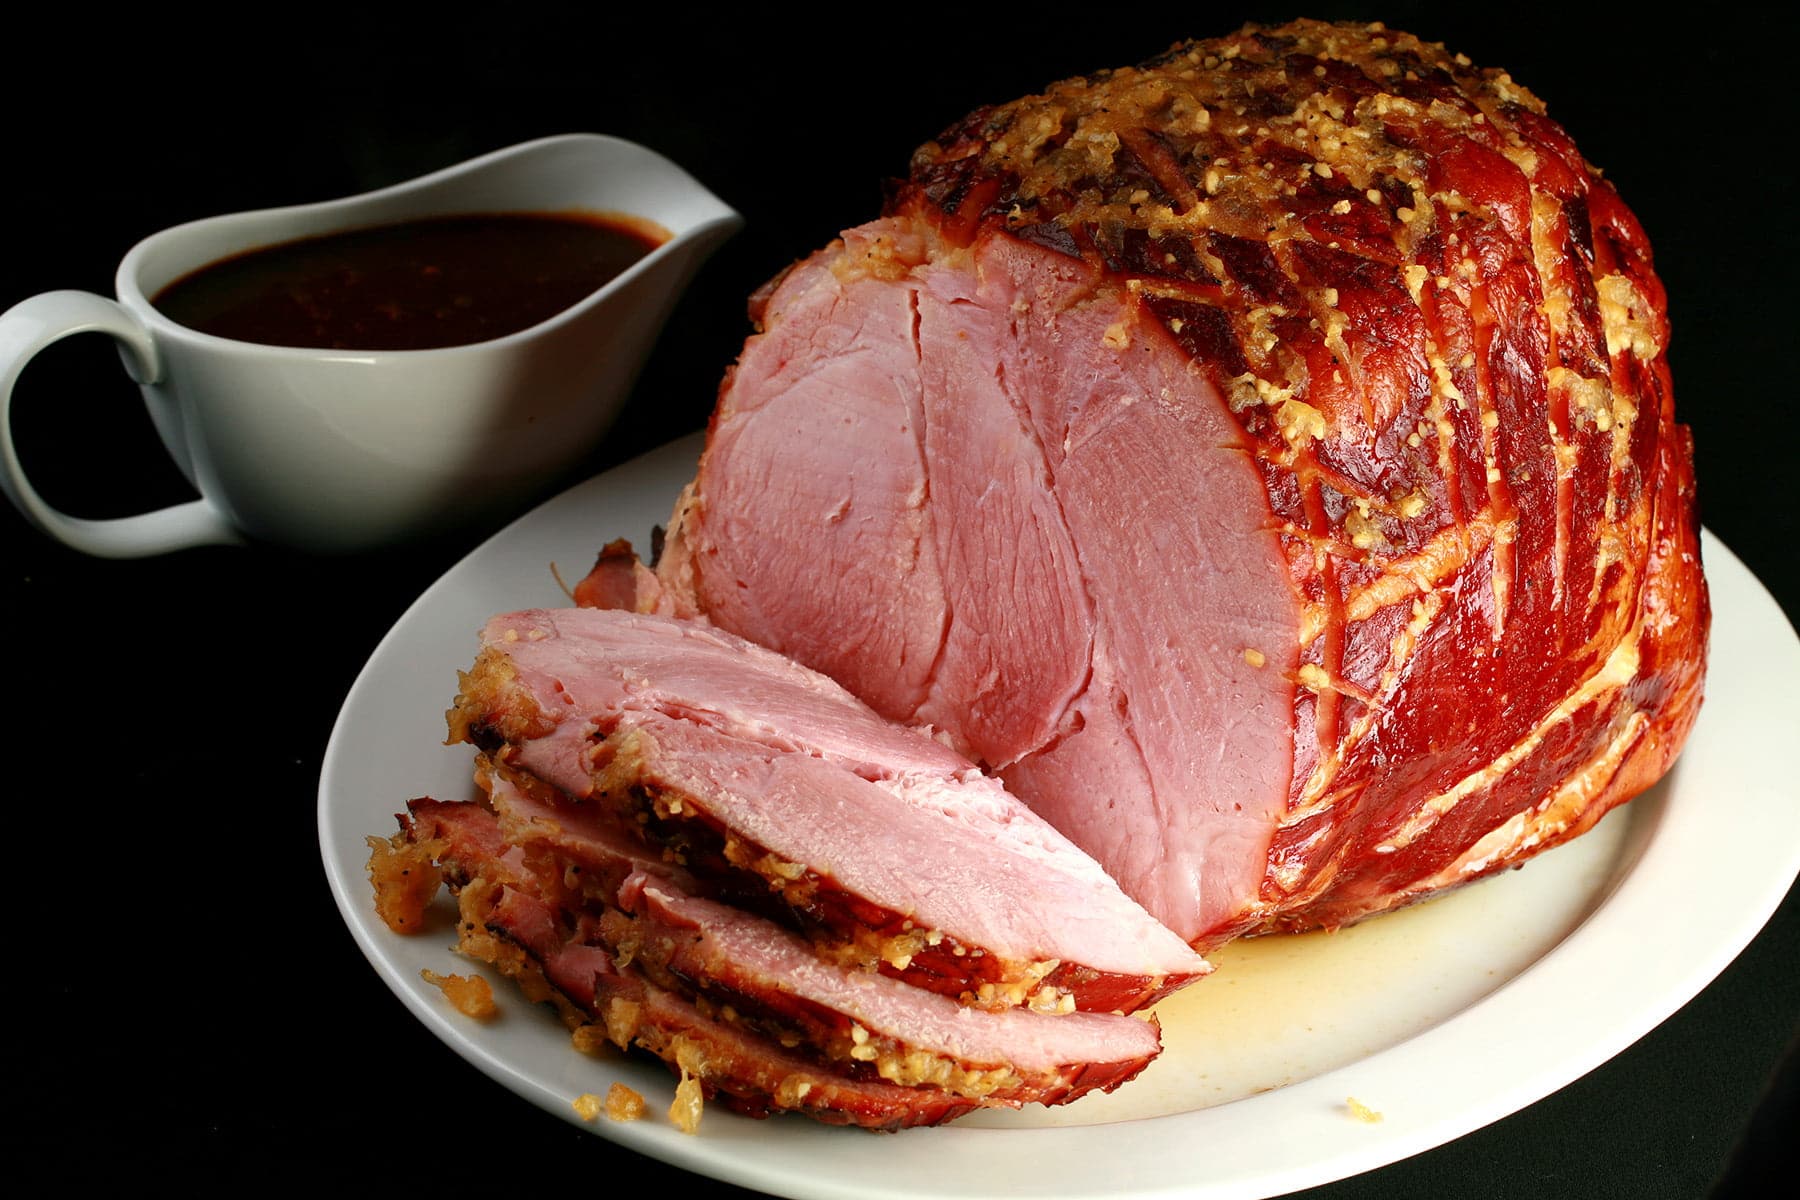 A large ham on a white platter. There are several generous slices of ham in the foreground.